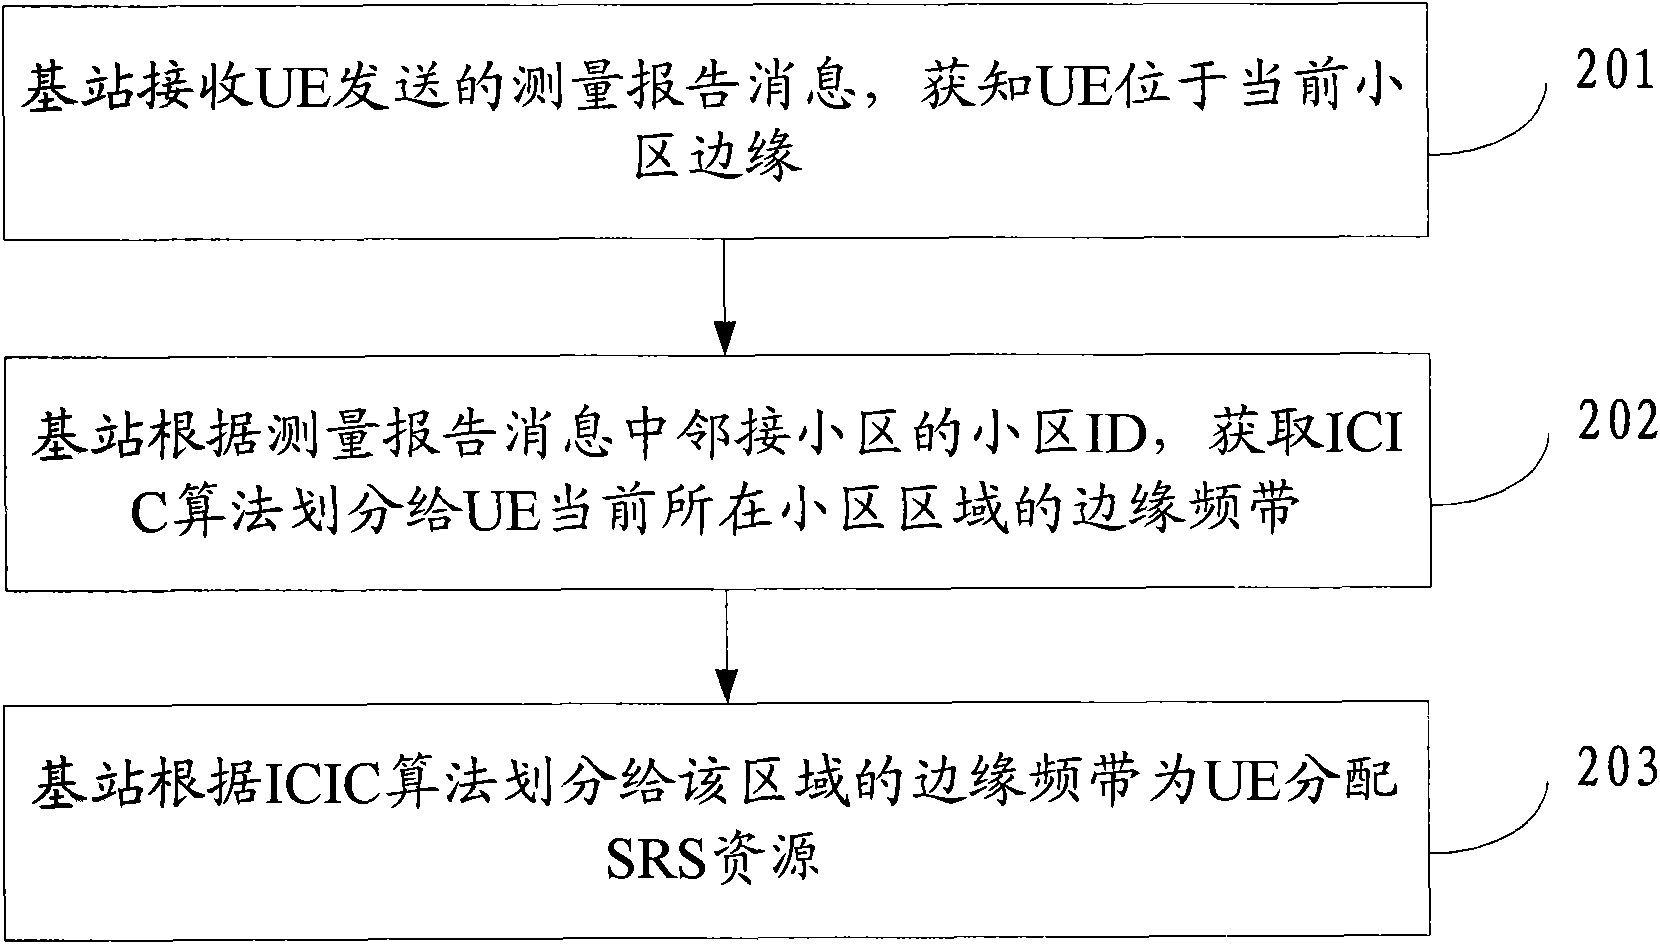 Sounding reference signal resource allocation method, system and device